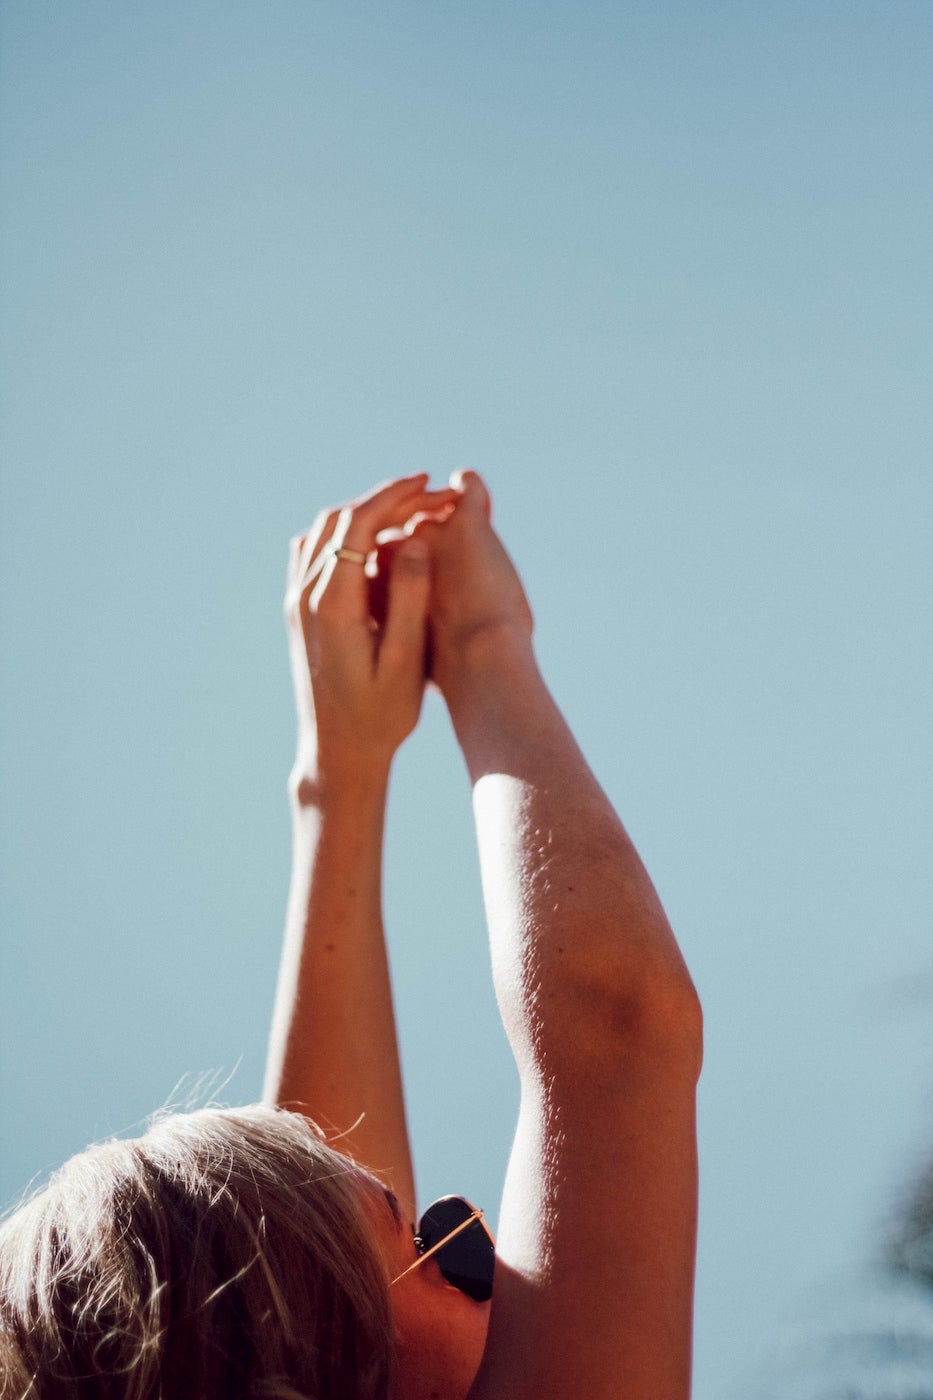 Women stretching her hands up towards the sky on a sunny day.